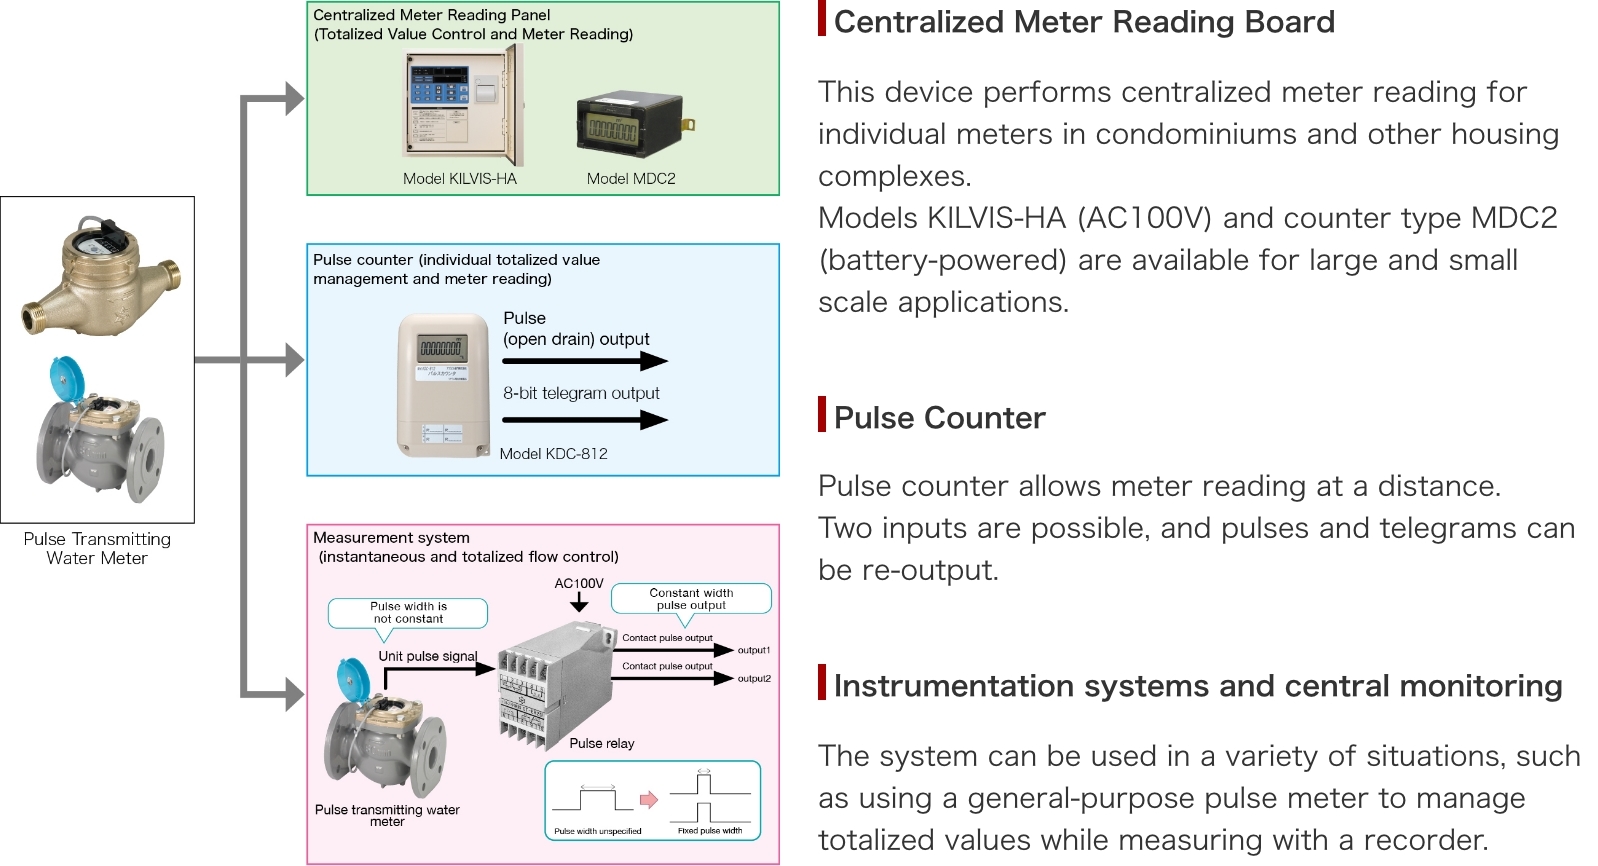 Centralized Meter Reading Board／Pulse counter／Instrumentation systems and central monitoring